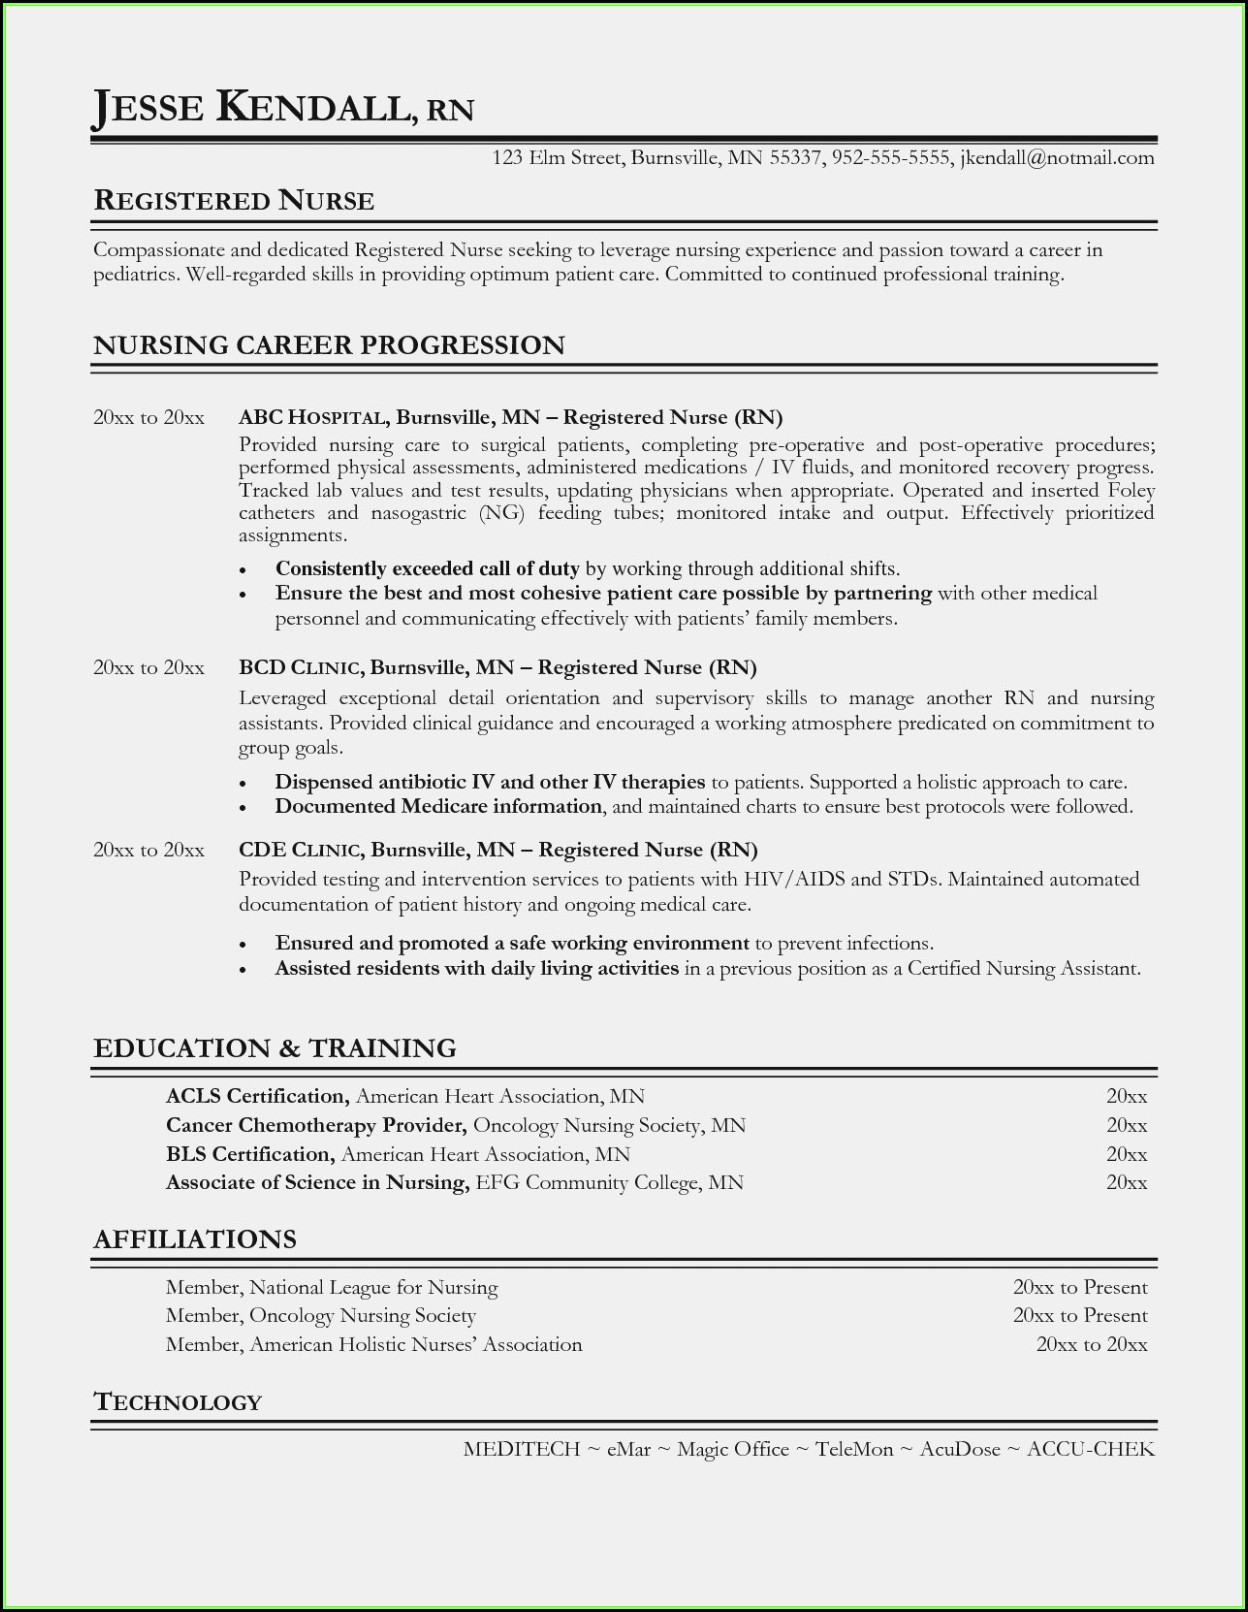 Monster Resume Critique Review